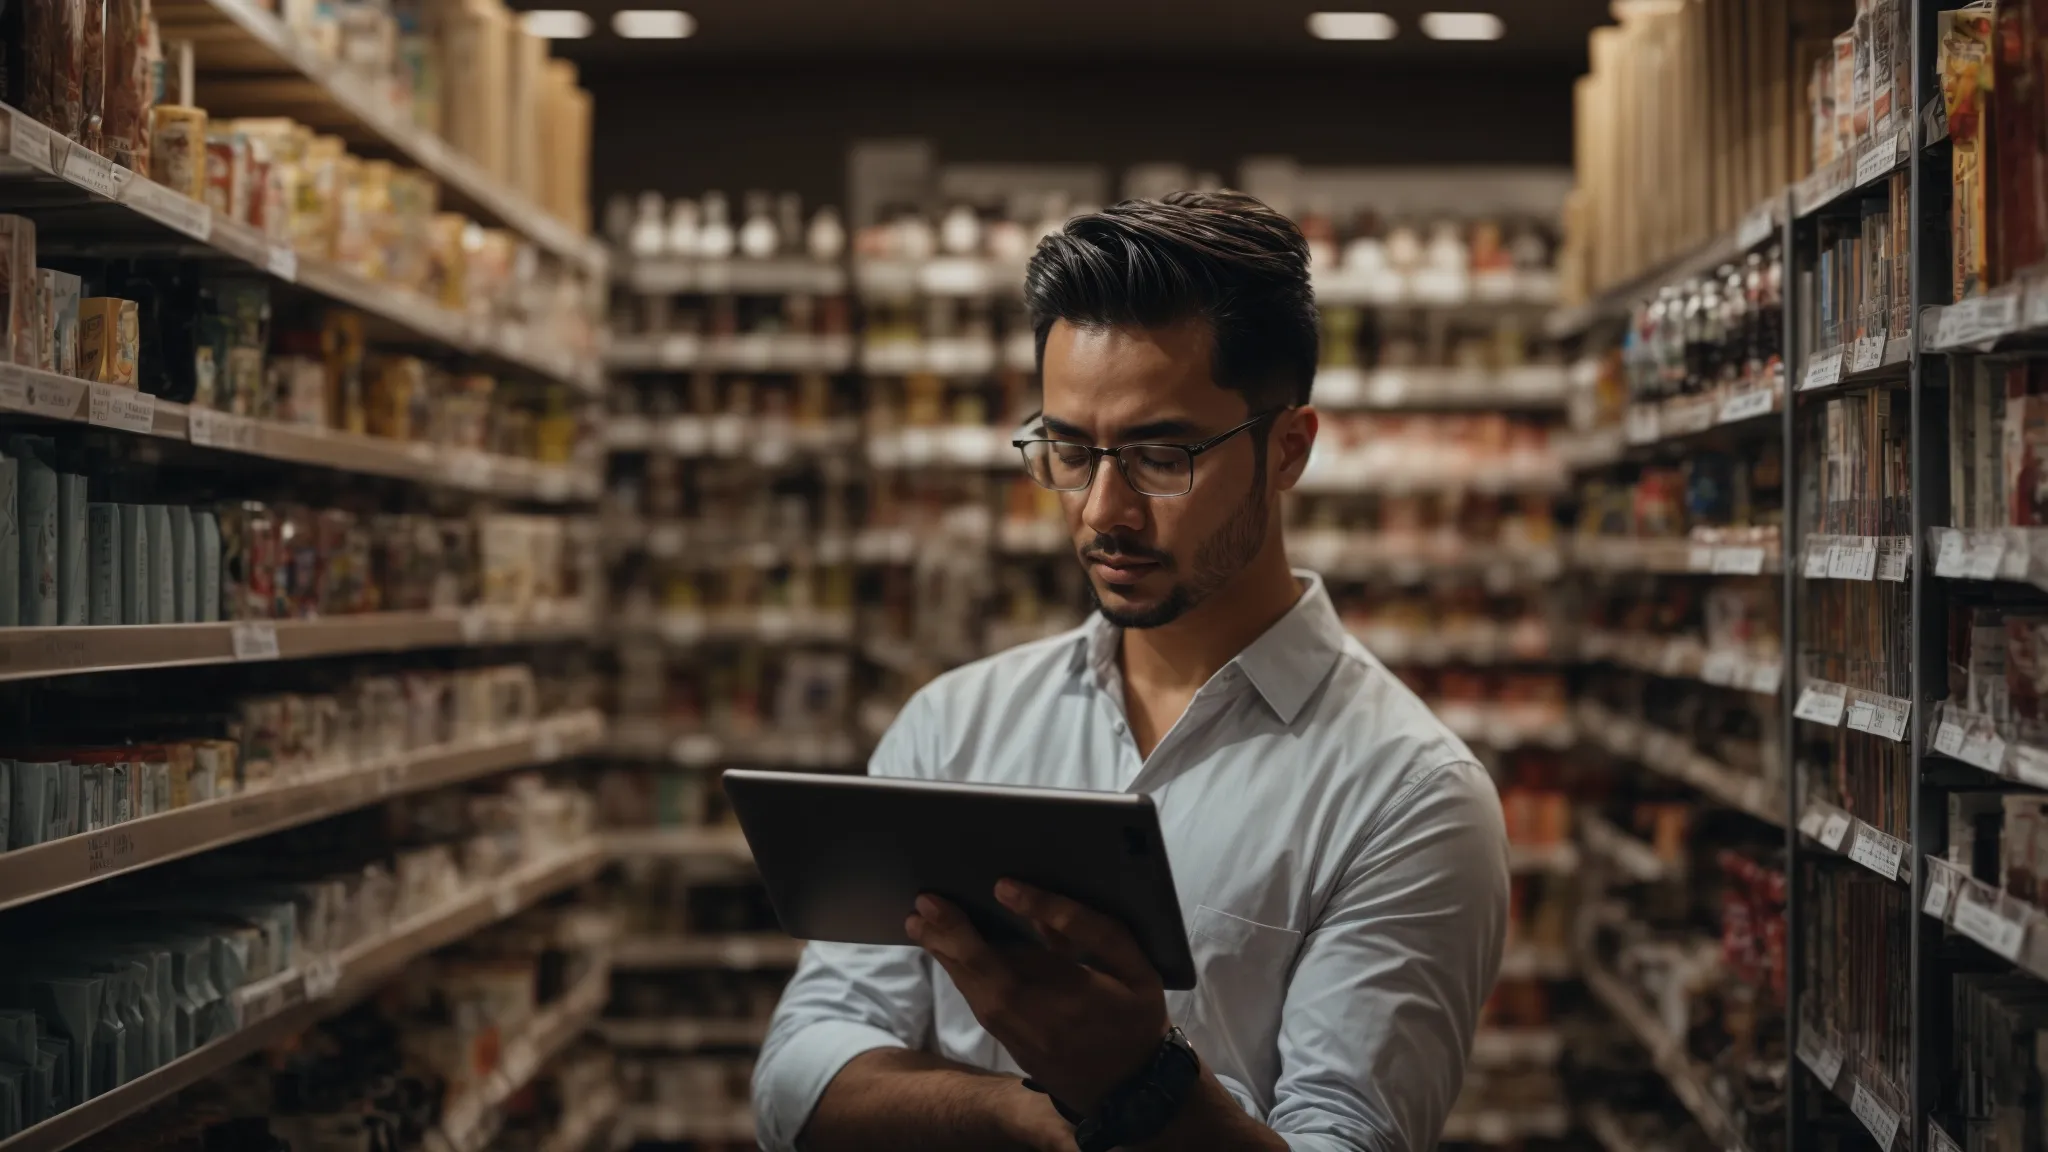 a focused individual examines a dense analytical report on a digital tablet amidst shelves of niche market products.